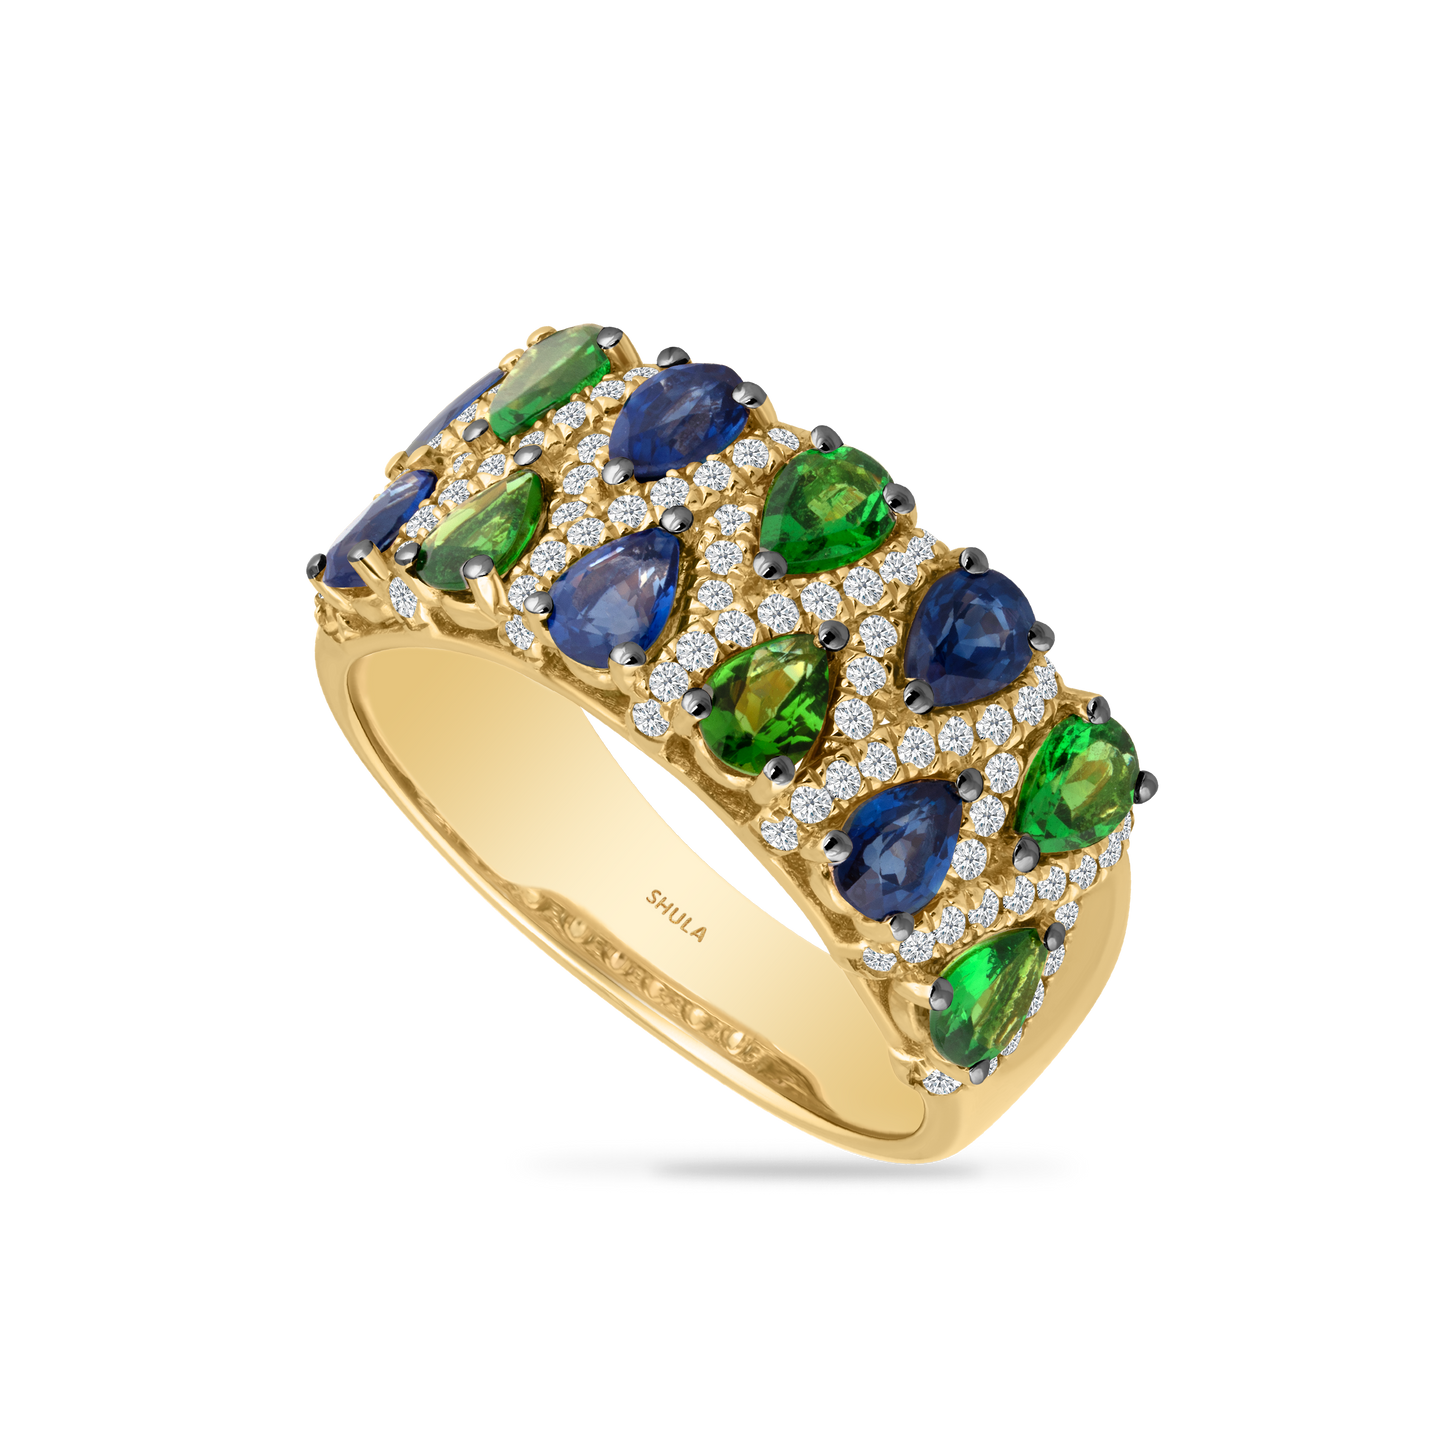 14K RING WITH 87 DIAMONDS 0.33CT, 6 BLUE SAPPHIRES 1.30CT AND 6 GREEN GARNETS 0.85CT